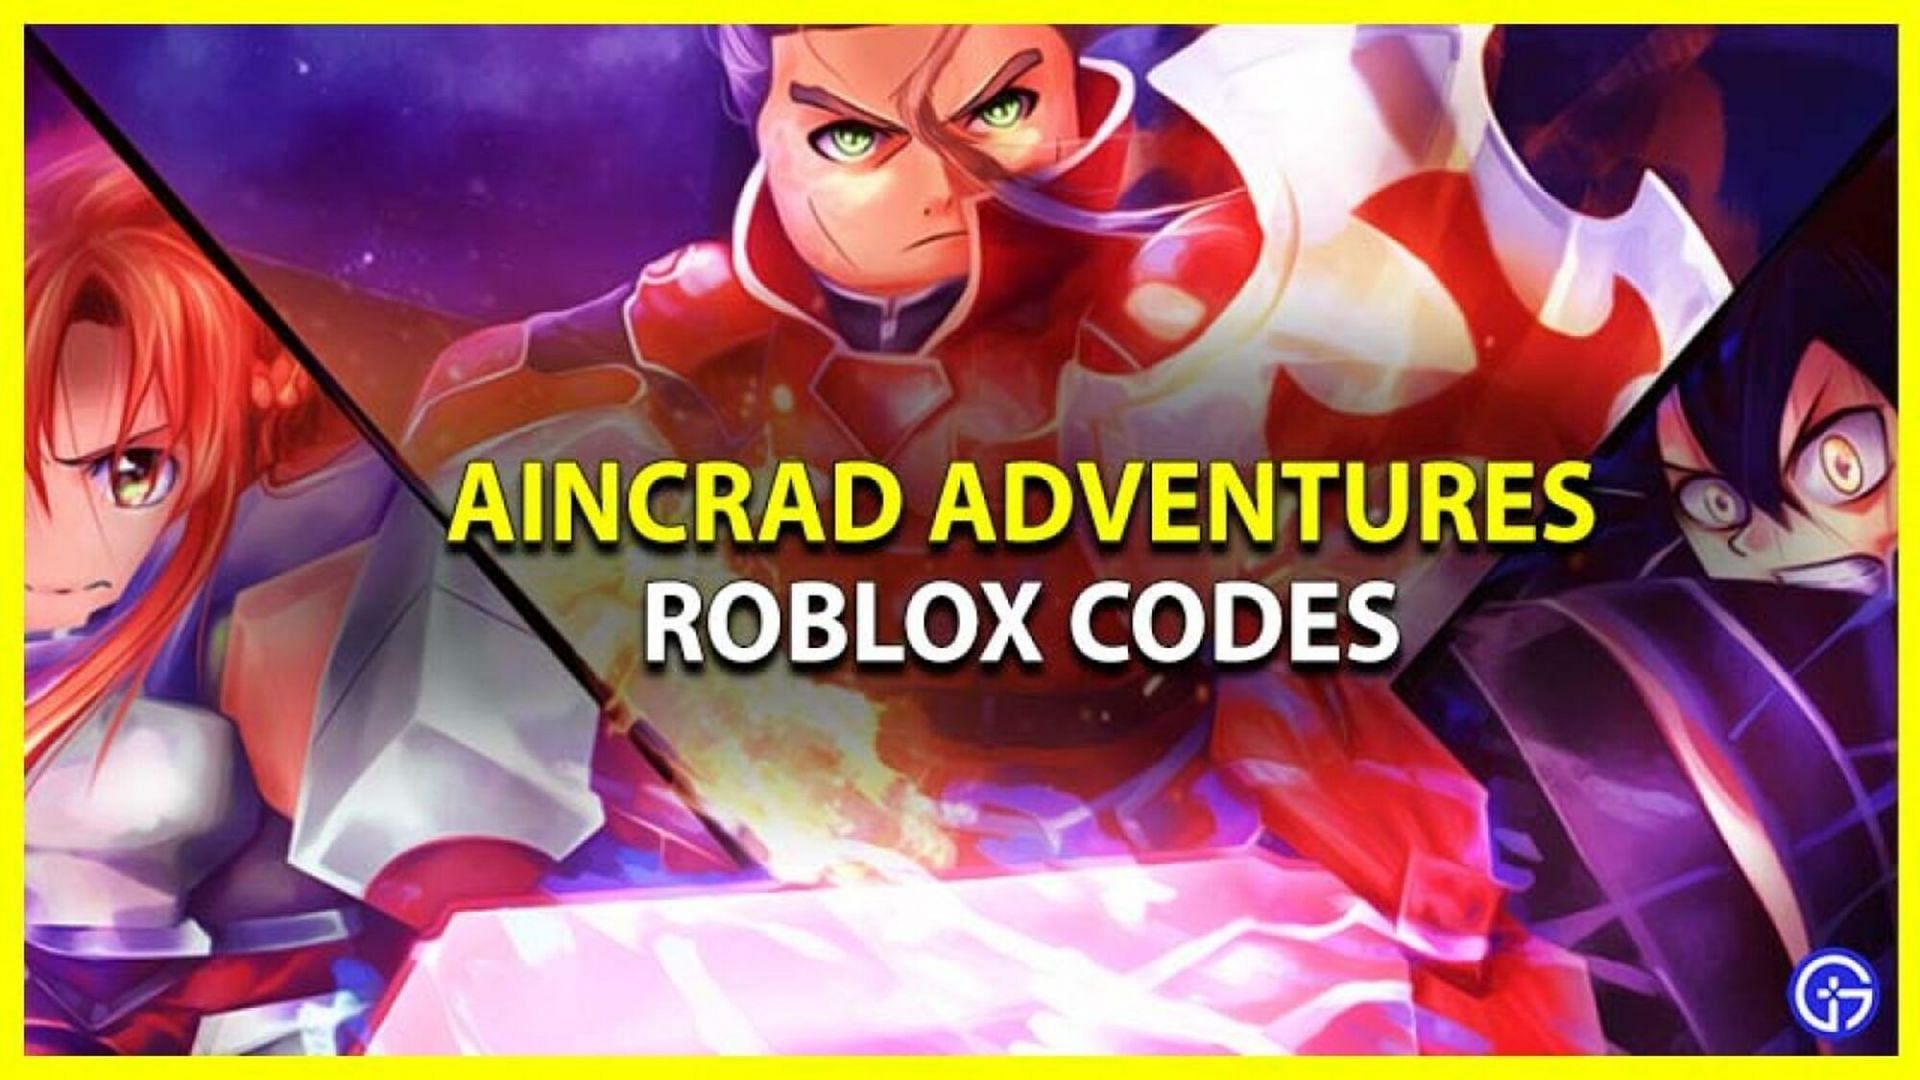 Aincrad Adventures codes – spins and resets